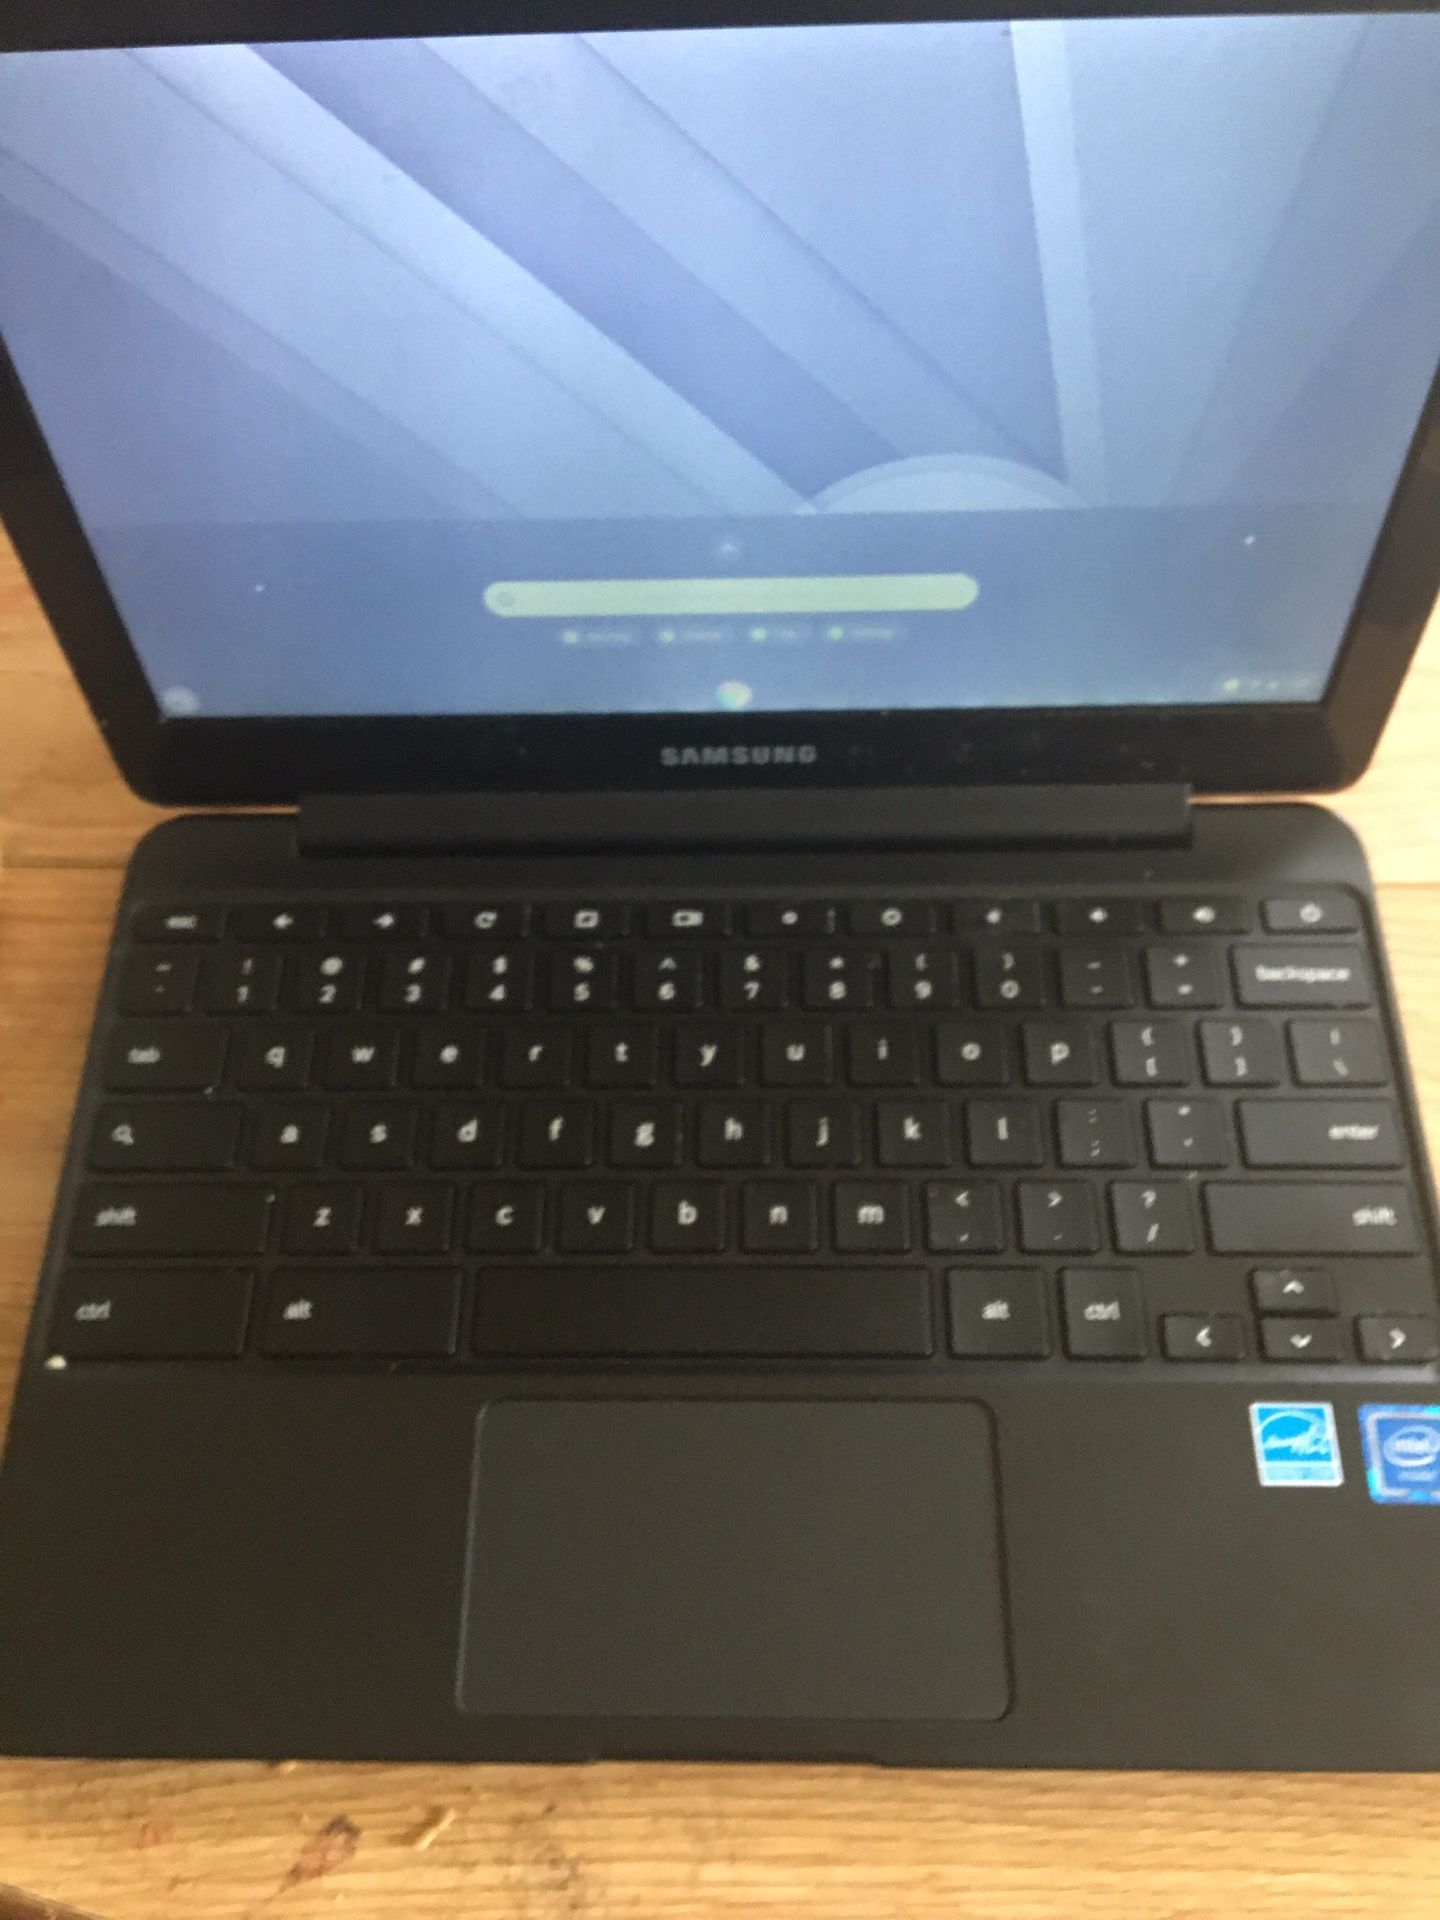 Samsung chromebook 3 not touch